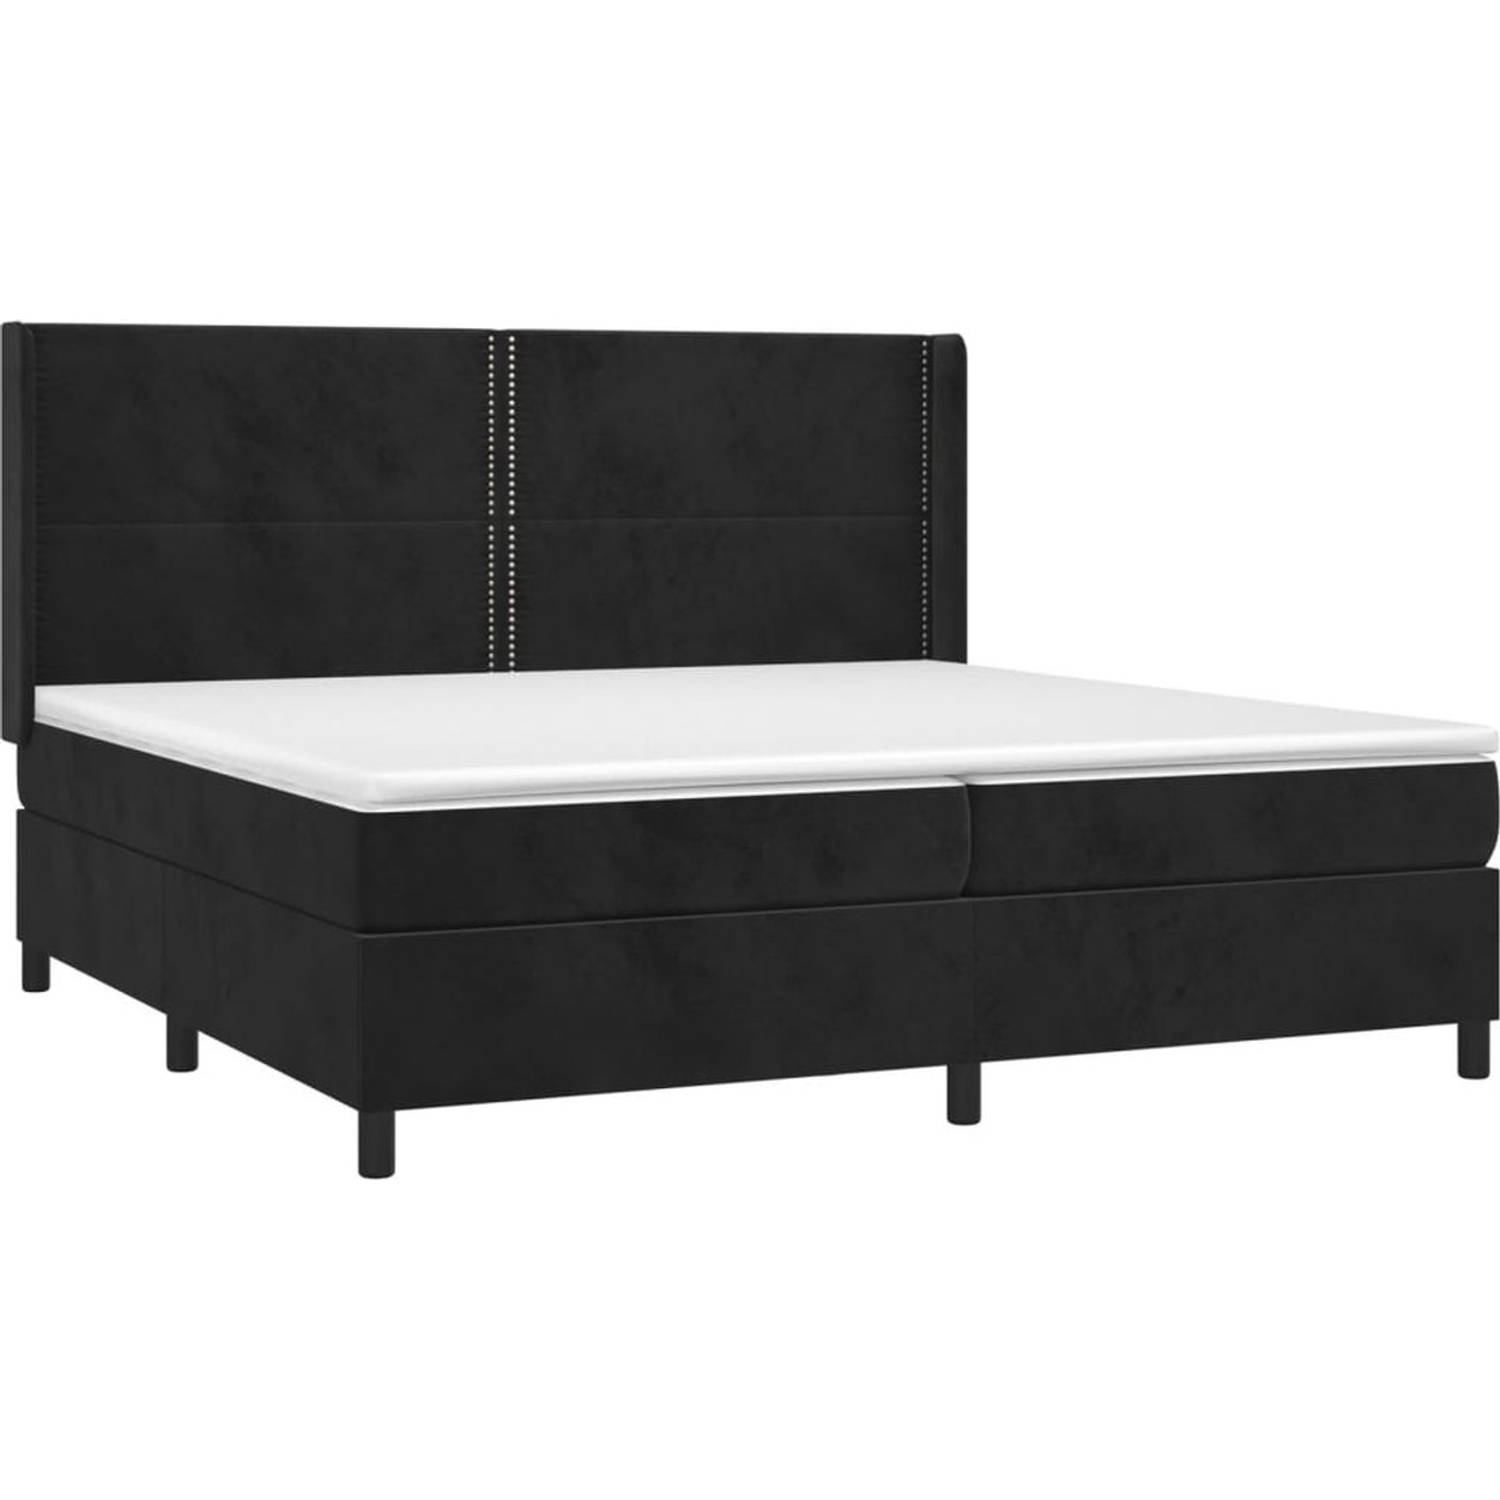 The Living Store Boxspringbed - The Living Store - Bed - 203 x 203 x 118/128 cm - Zwart - Fluweel